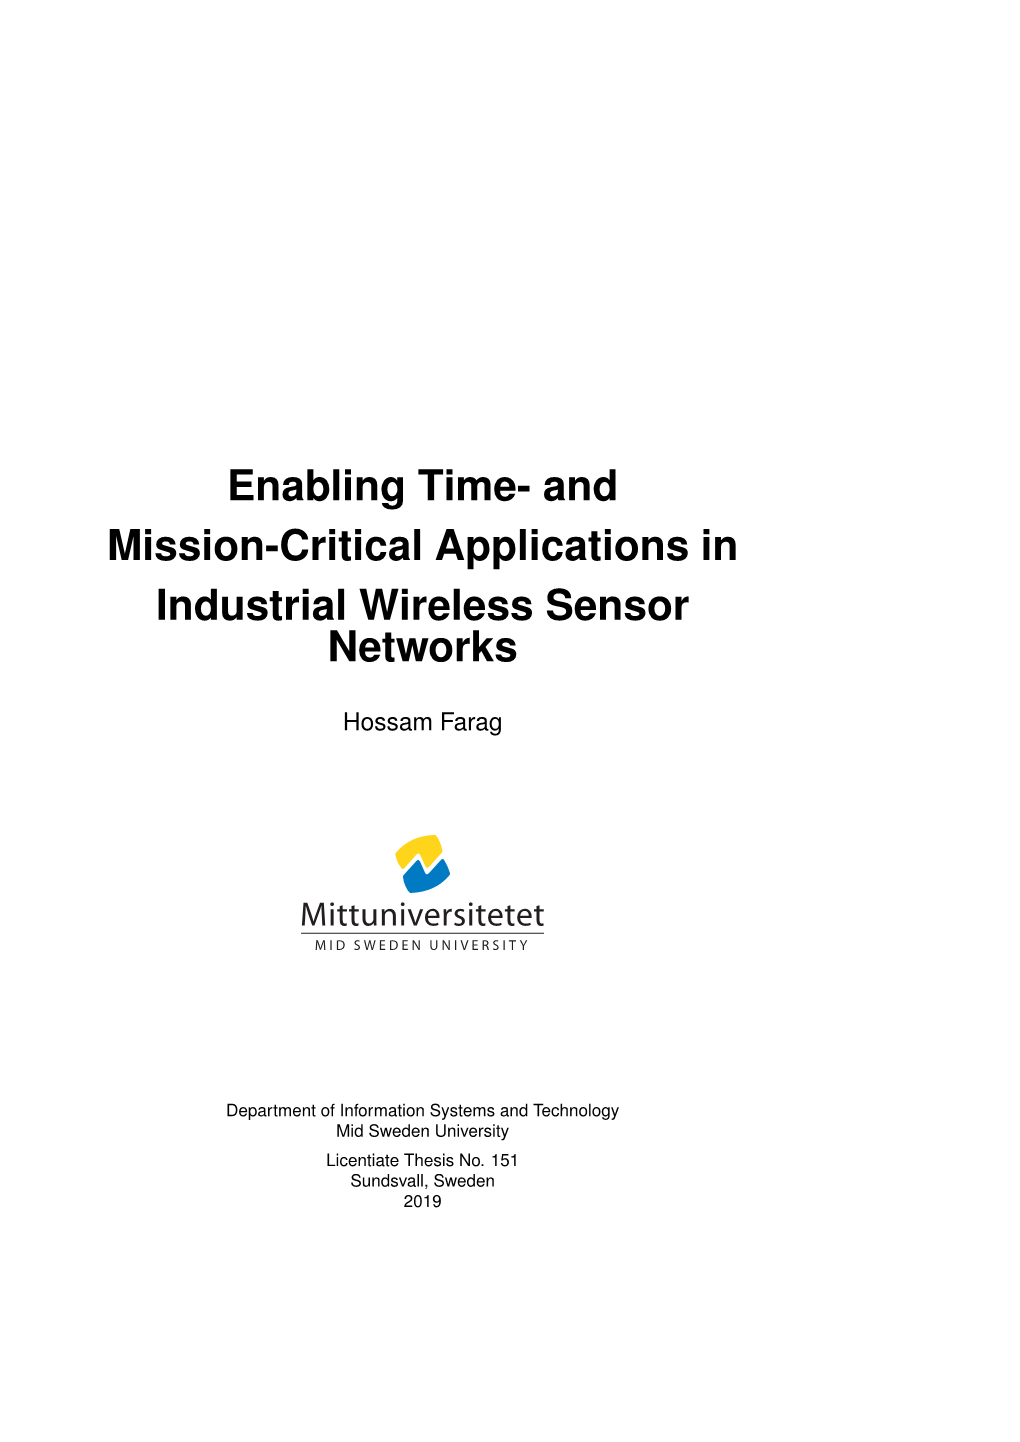 And Mission-Critical Applications in Industrial Wireless Sensor Networks